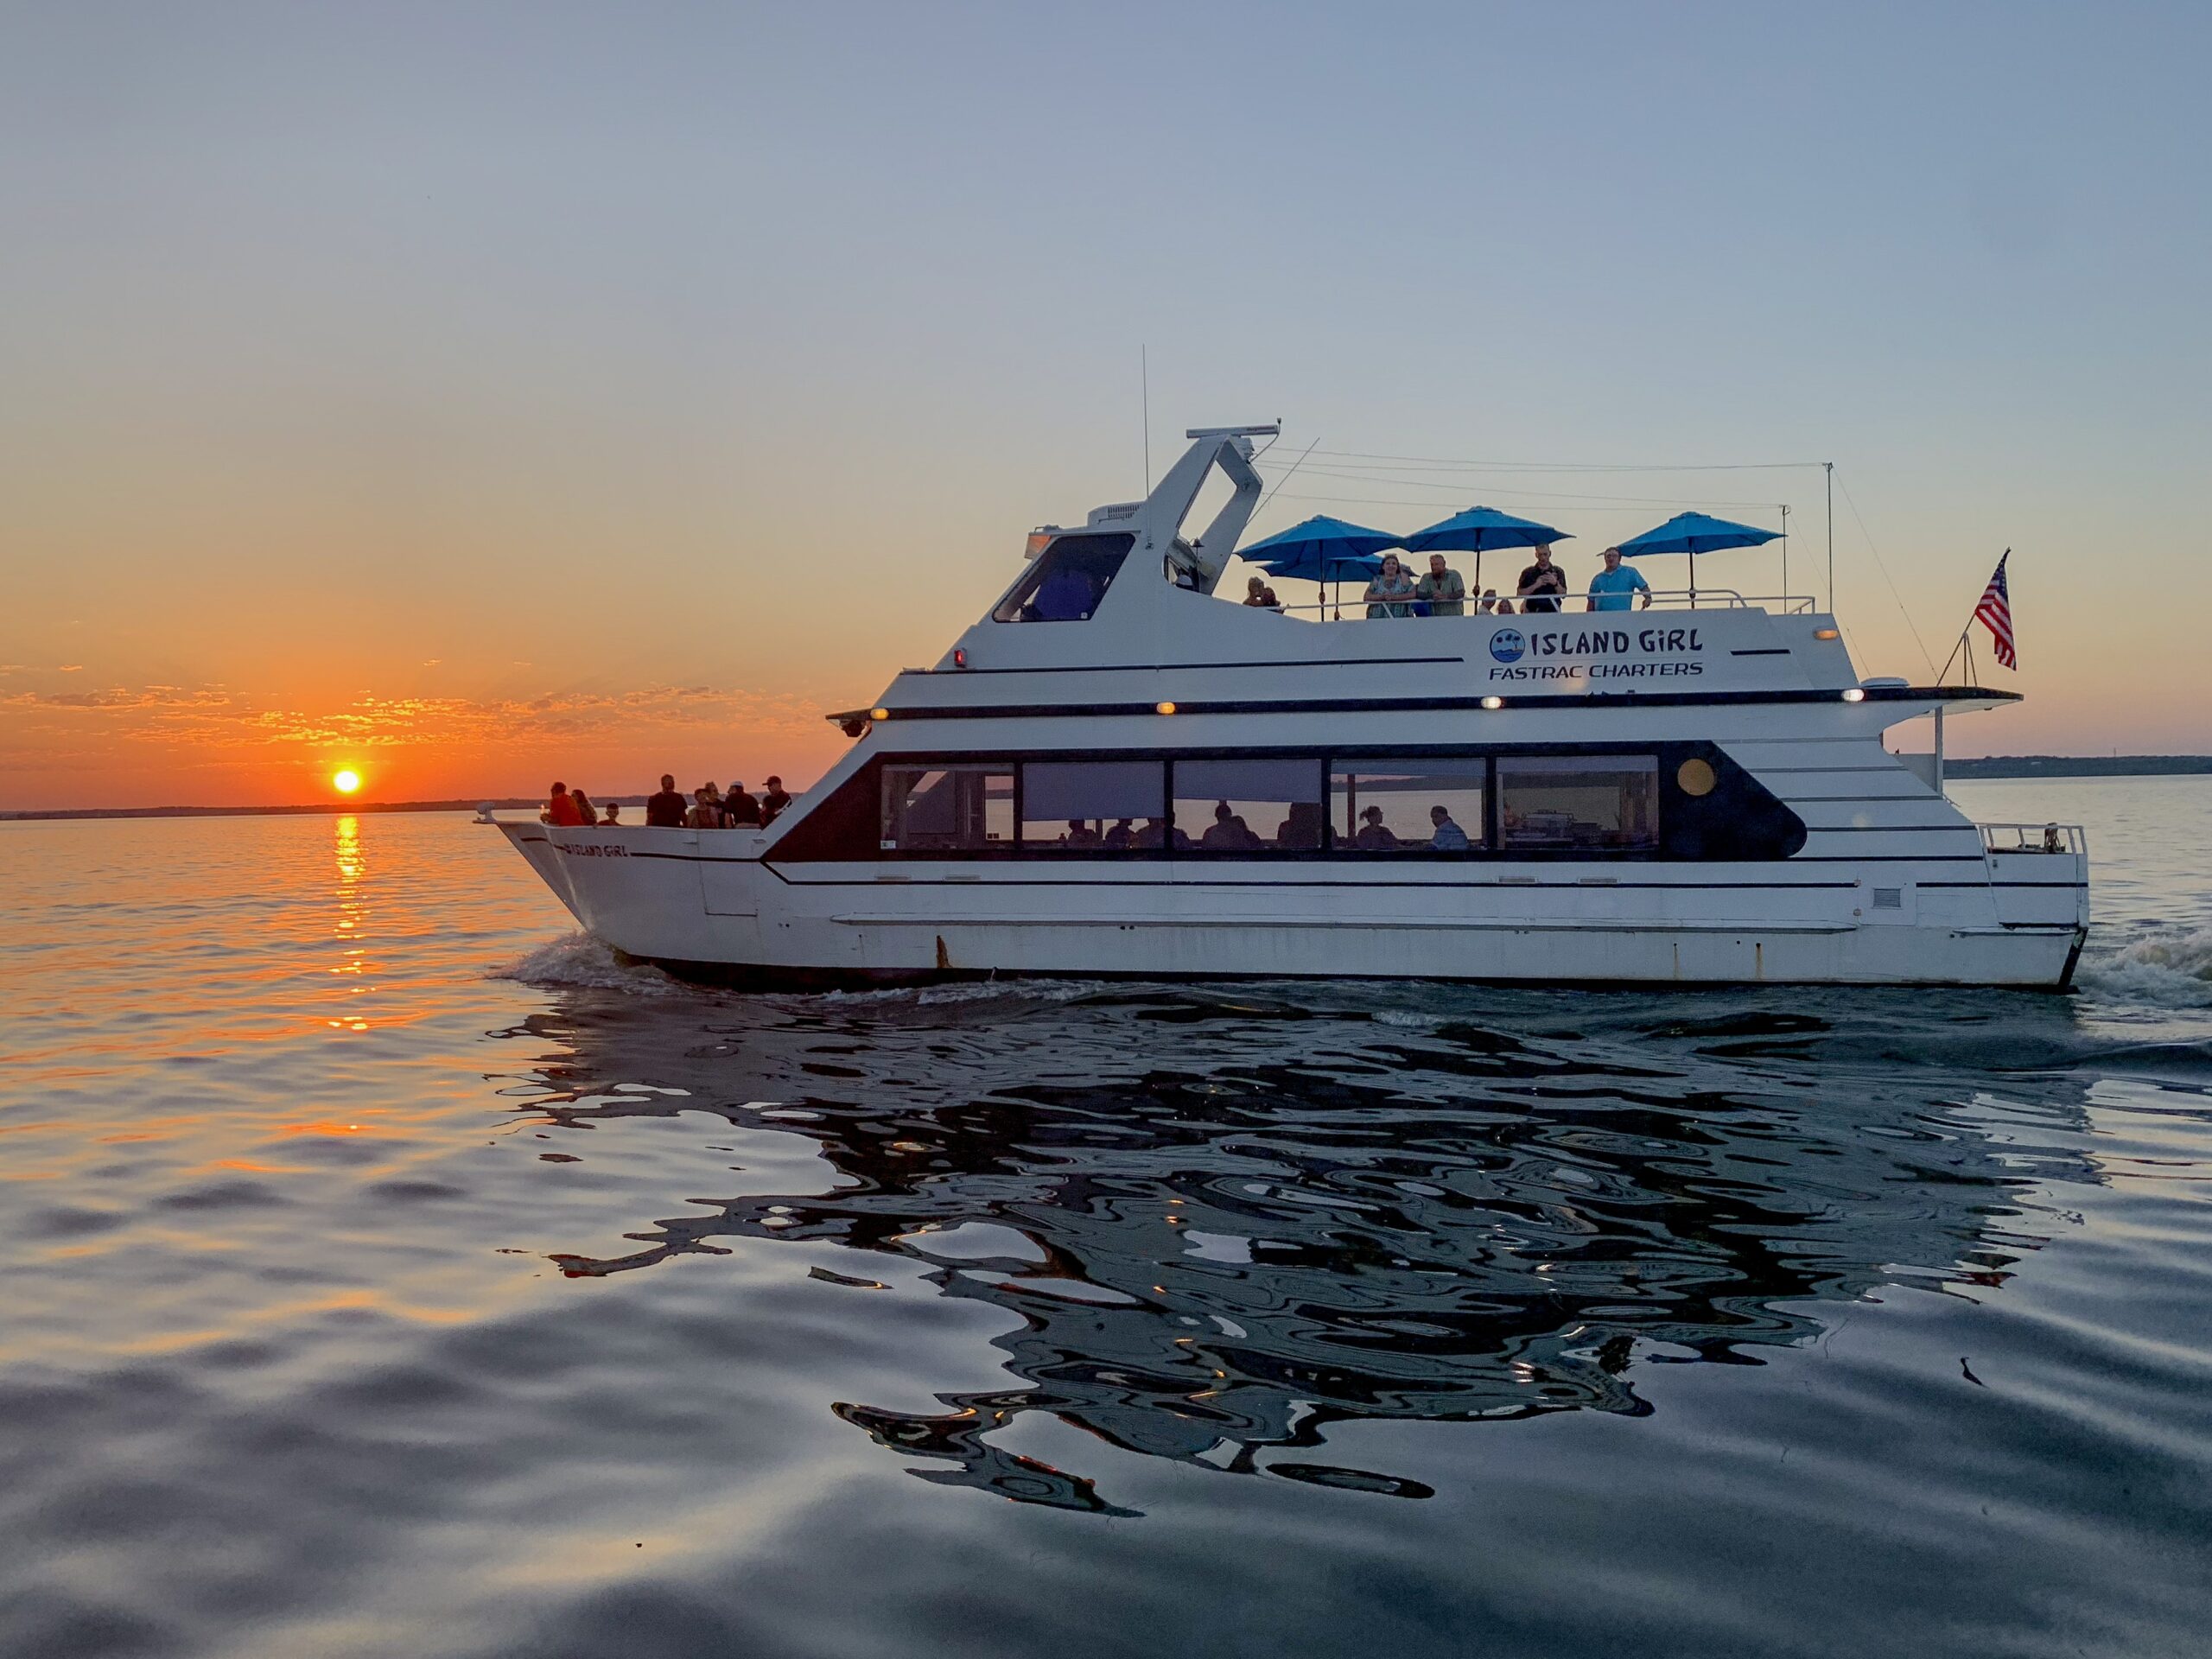 dinner cruise boats for sale usa